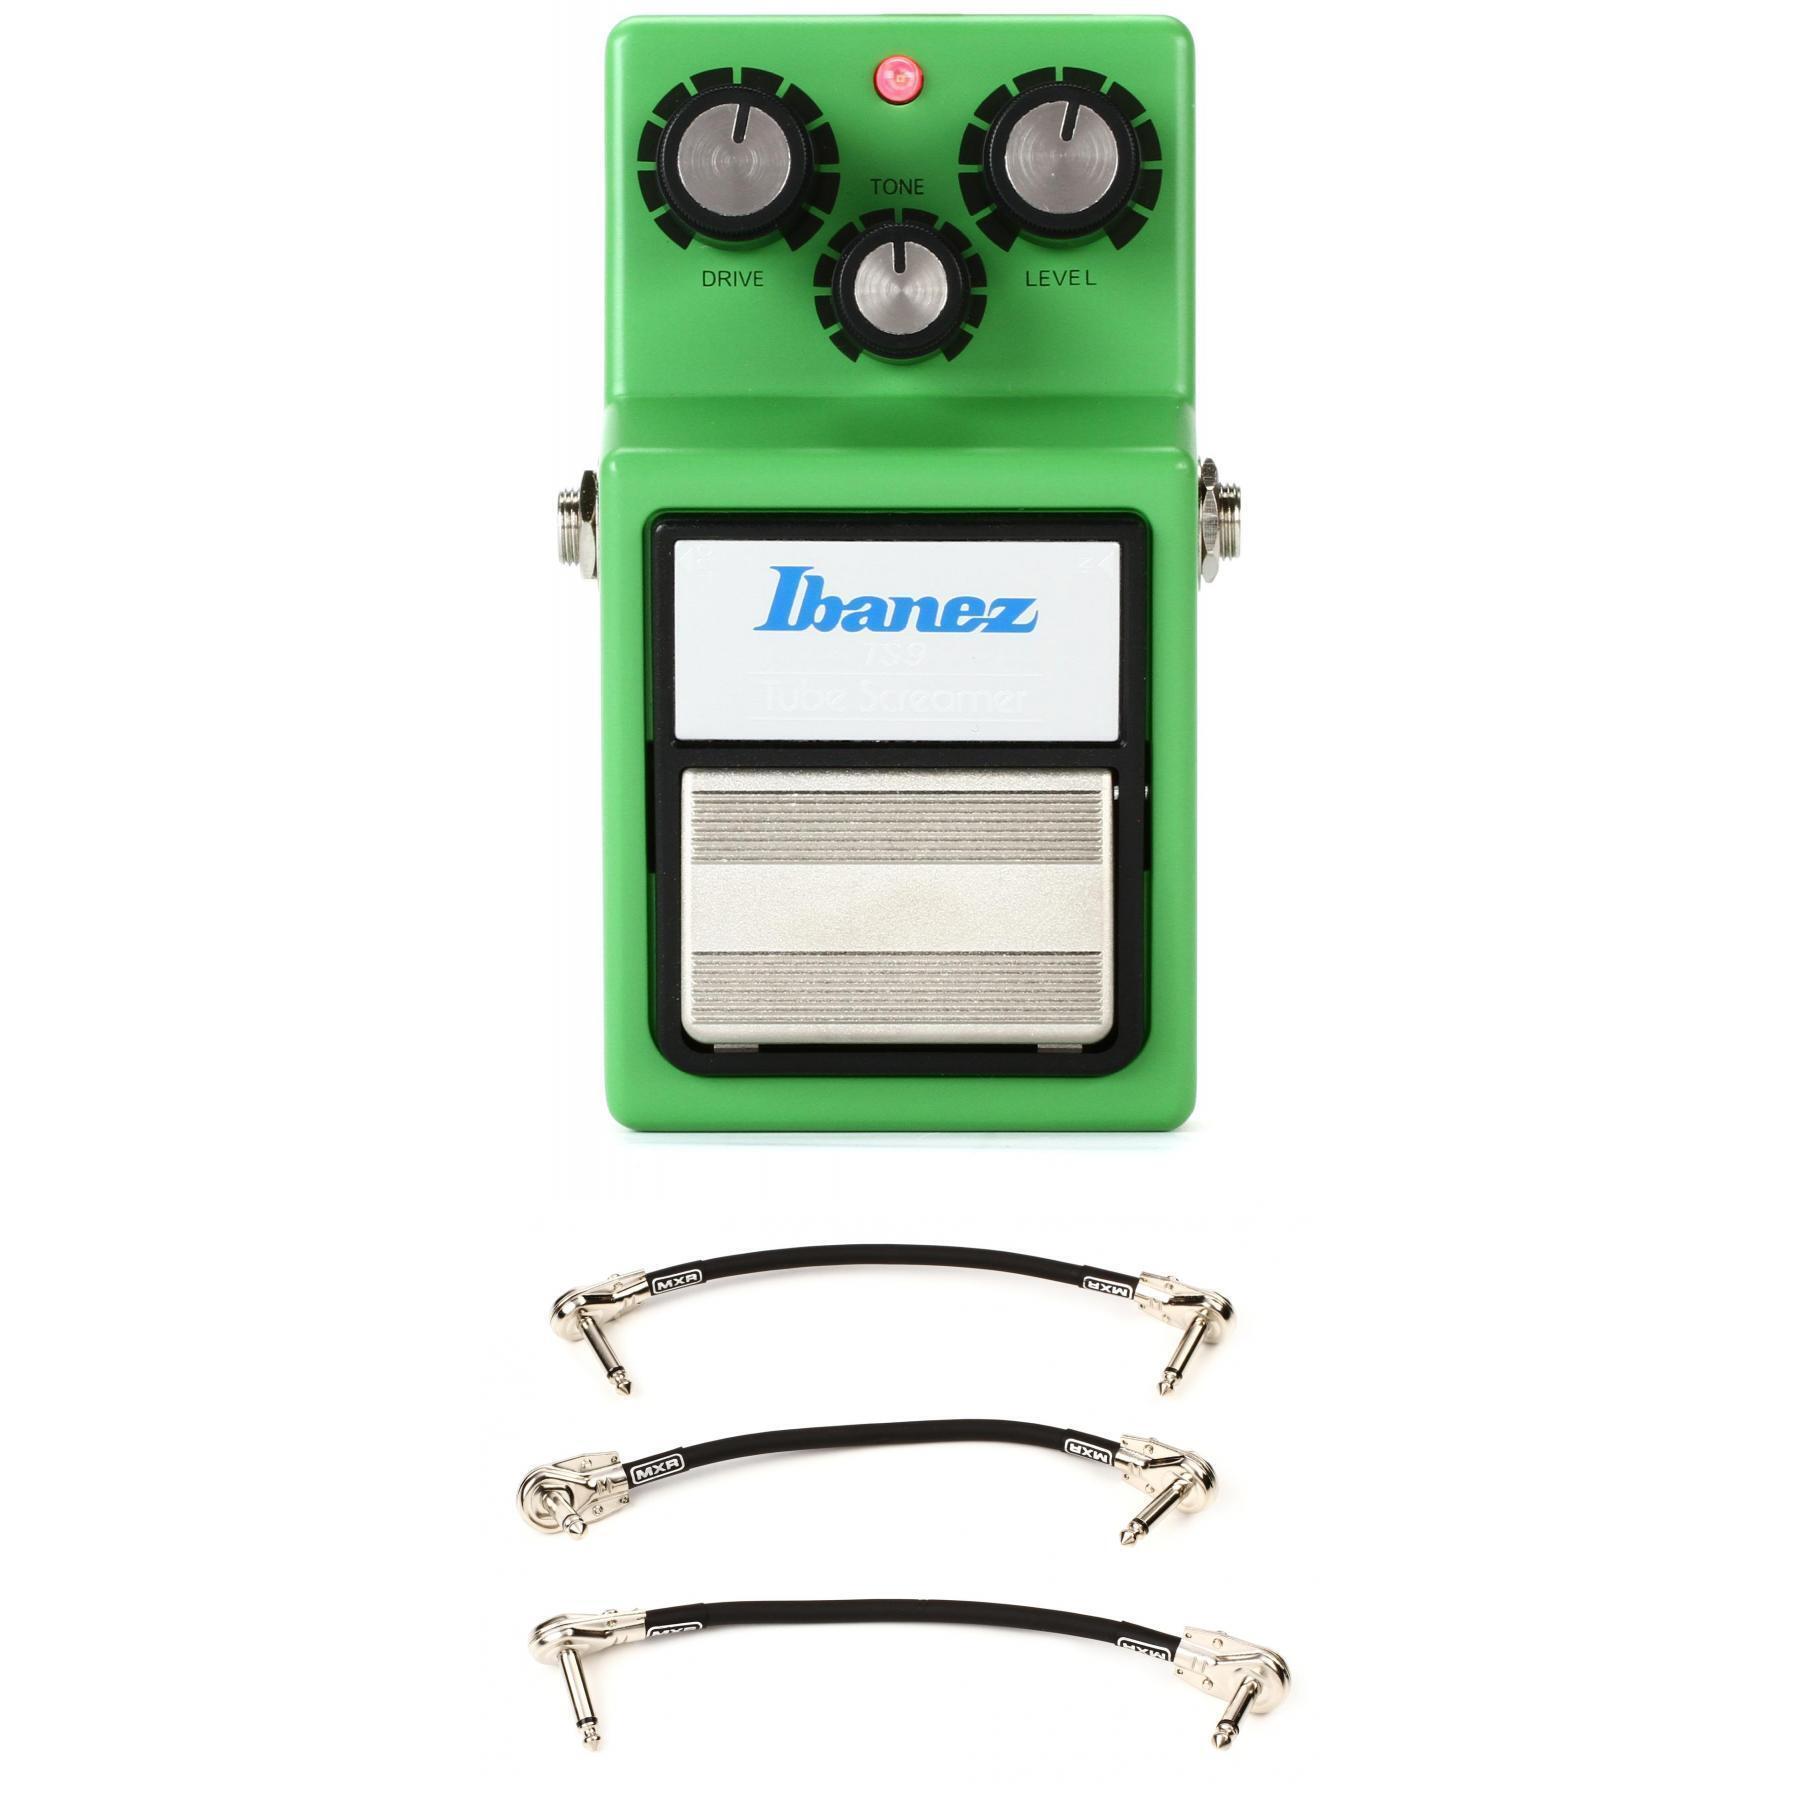 Ibanez TS9 Tube Screamer Overdrive Pedal with 3 Patch Cables